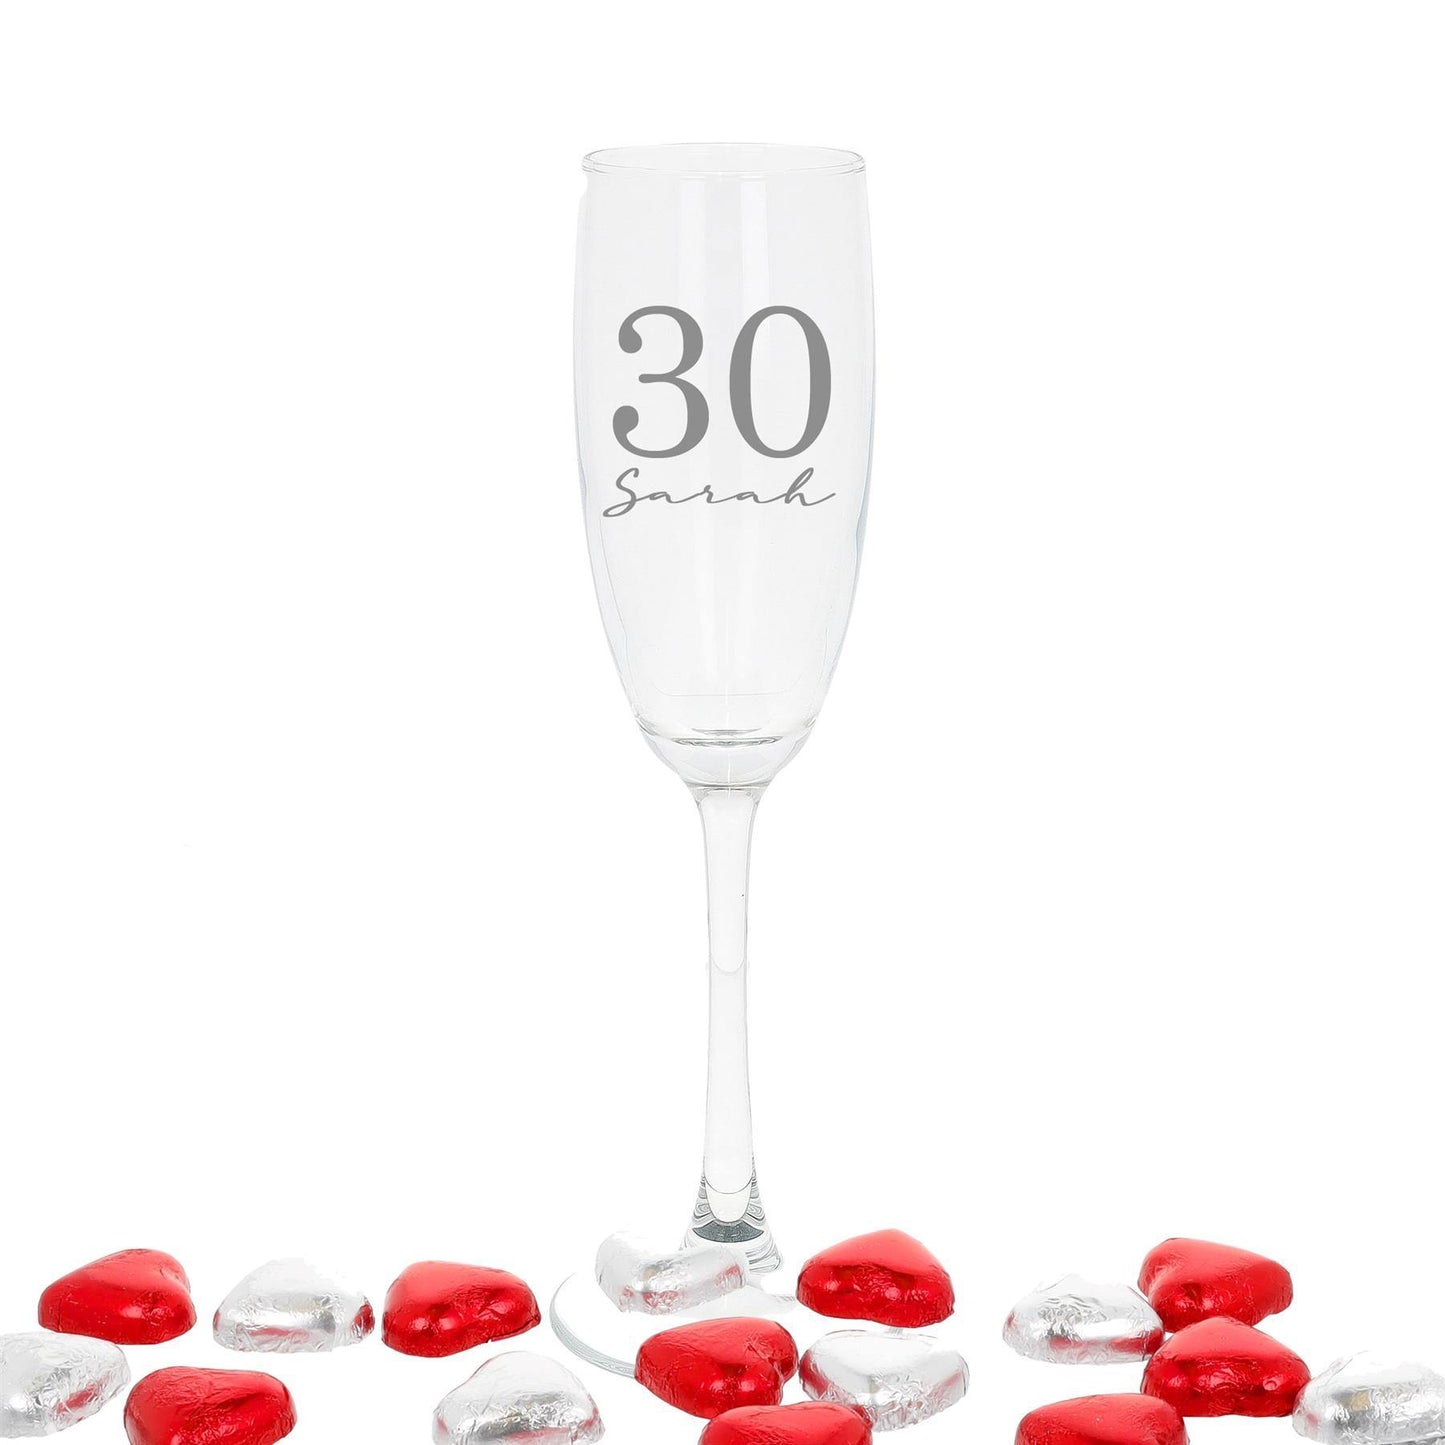 Personalised Engraved Big Birthday Champagne Flute Filled Occasion Glass  - Always Looking Good - Filled with Chocolate Hearts  